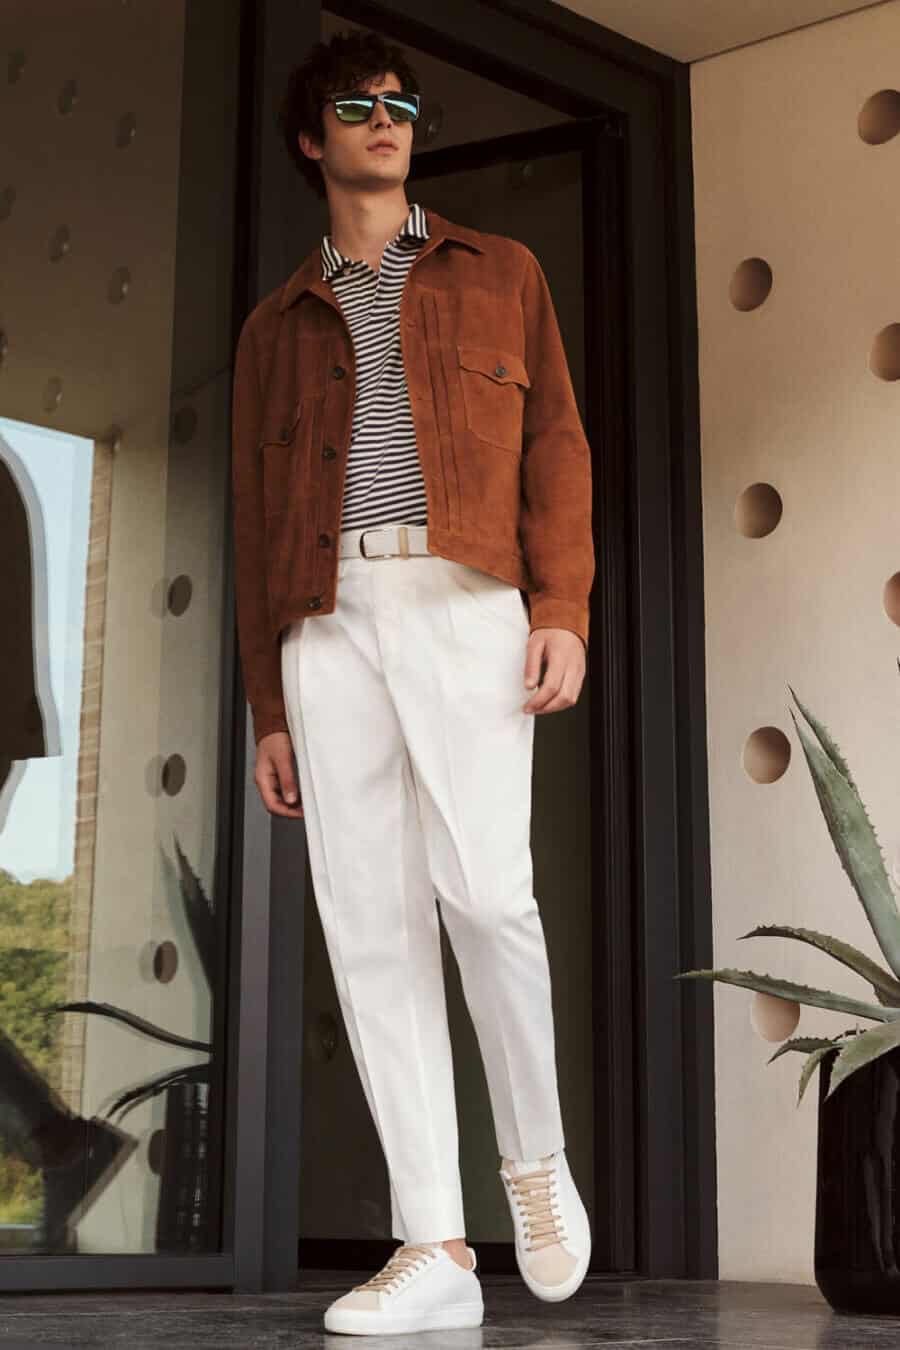 Men's suede jacket summer outfit with white trousers and sneakers